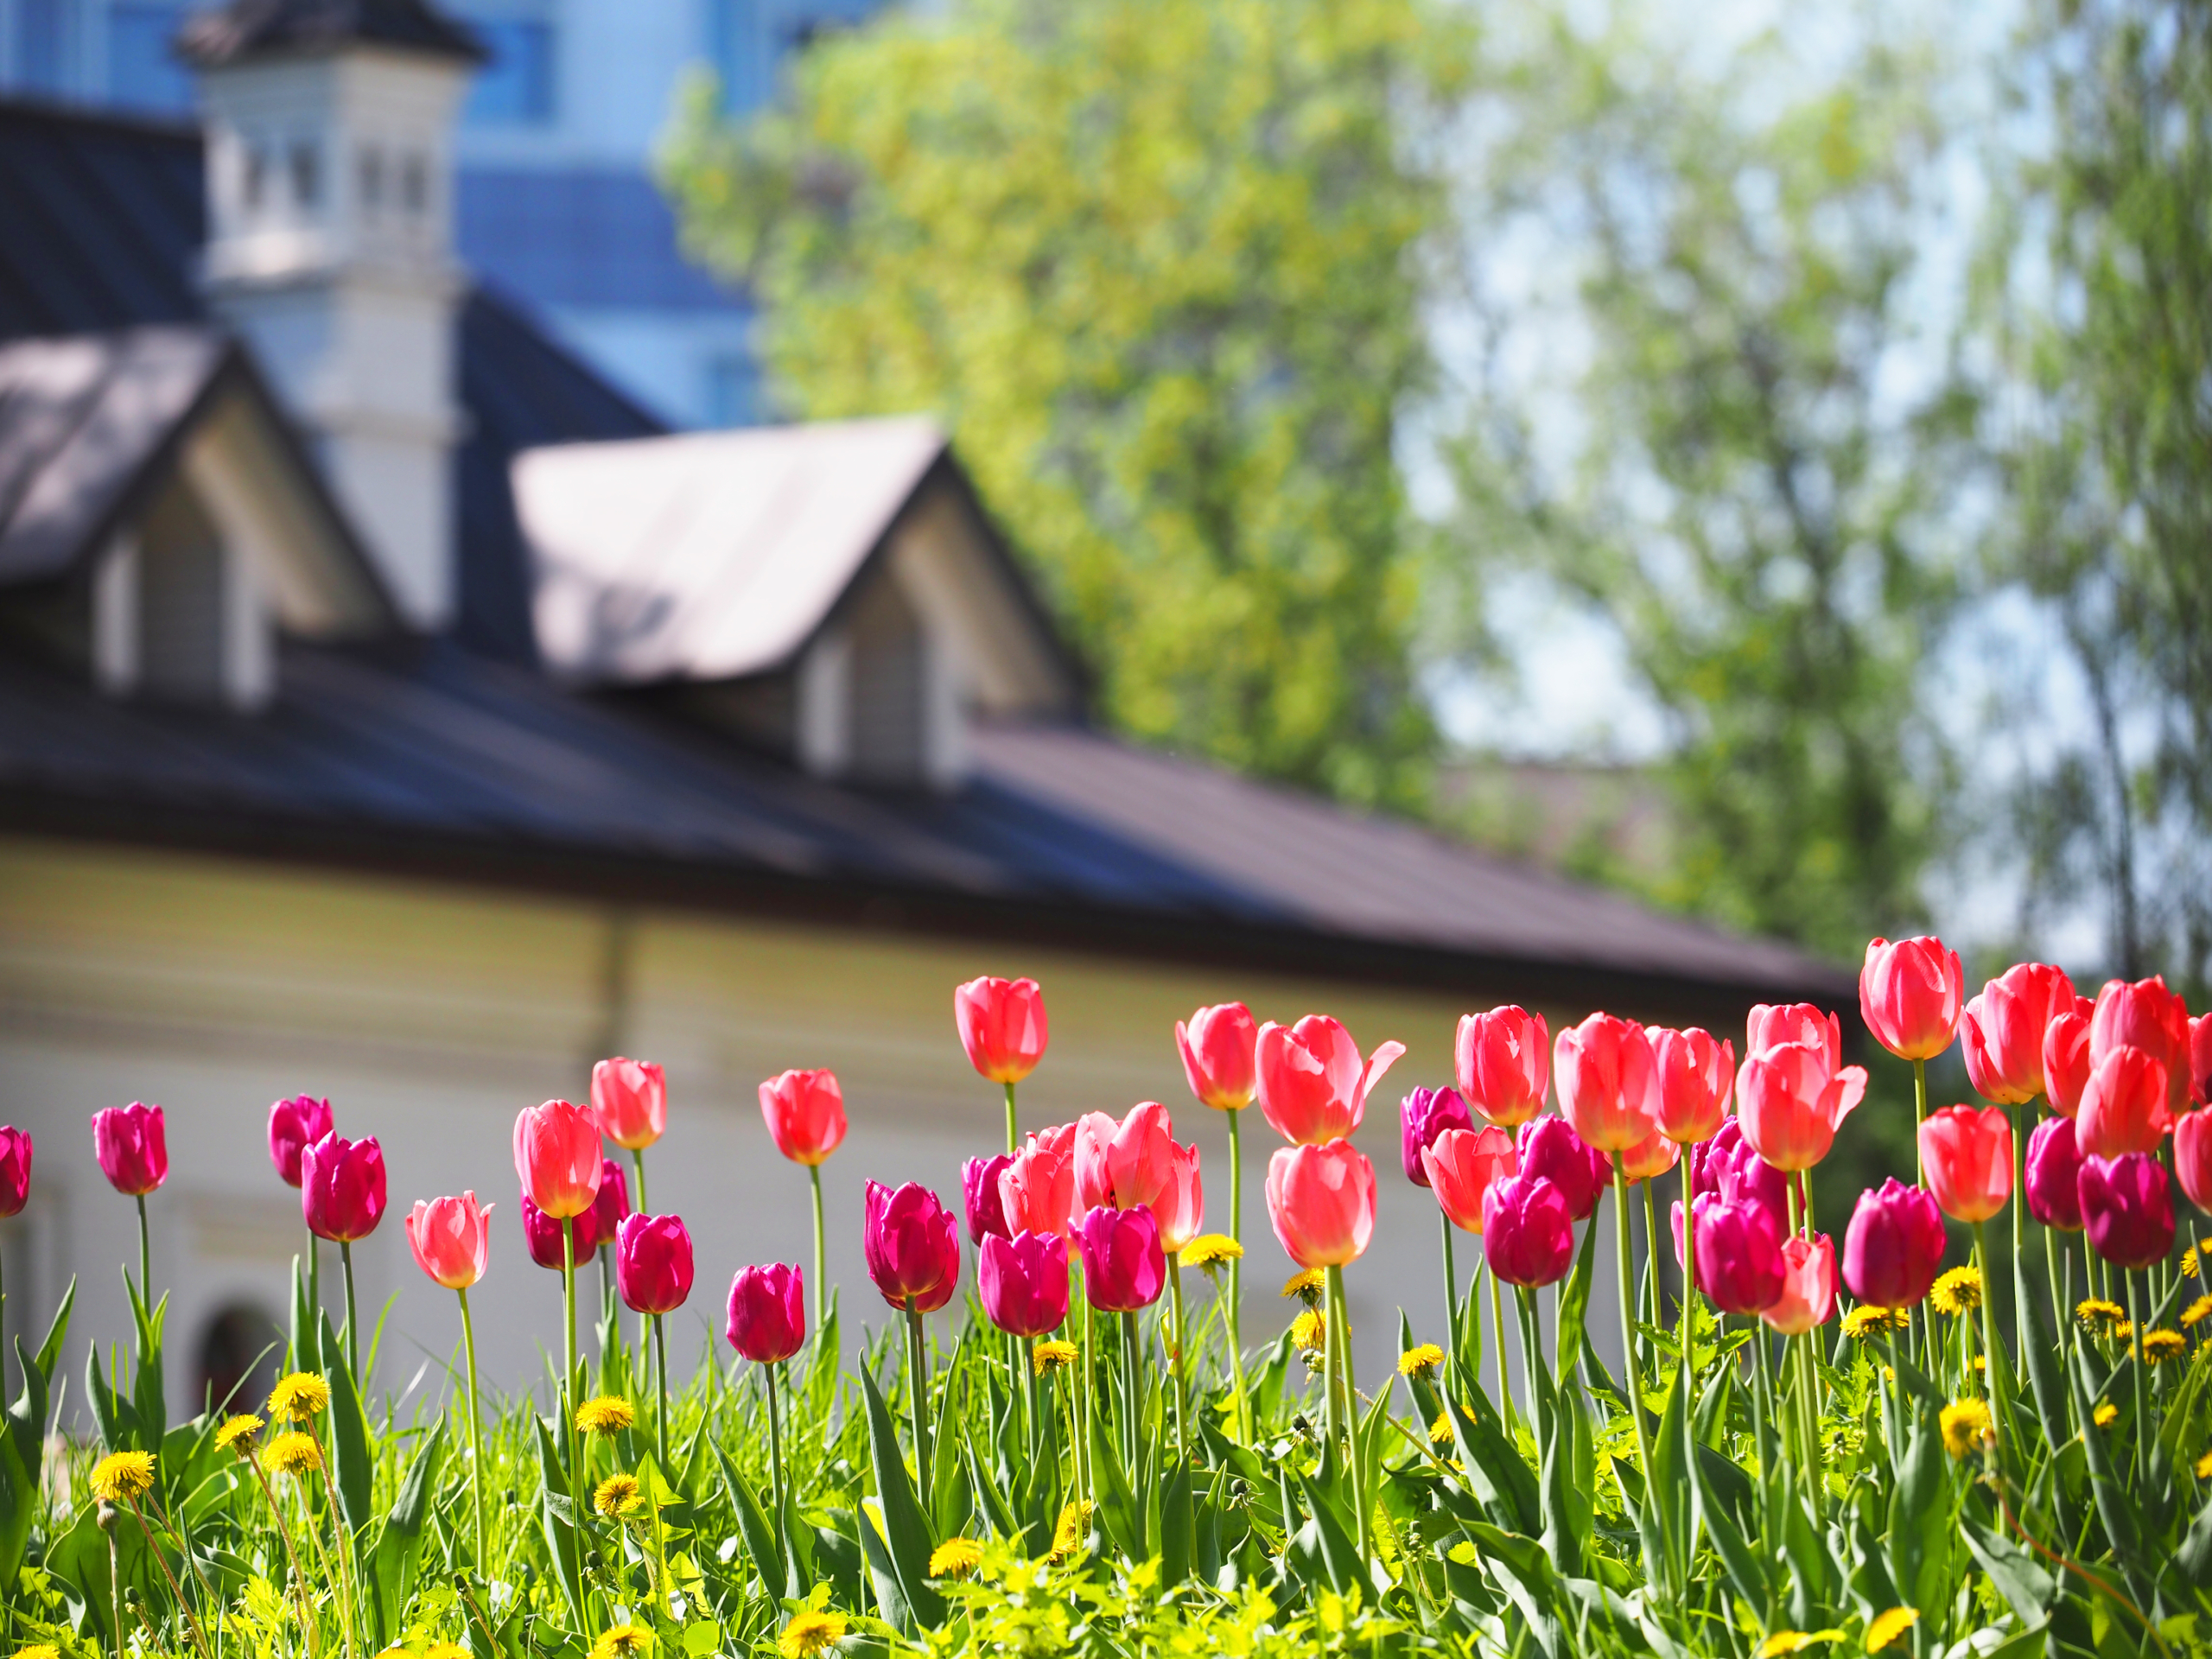 A flower bed with pink and purple tulips in the rays of sunlight against the backdrop of a beautiful white house with a sloping roof.